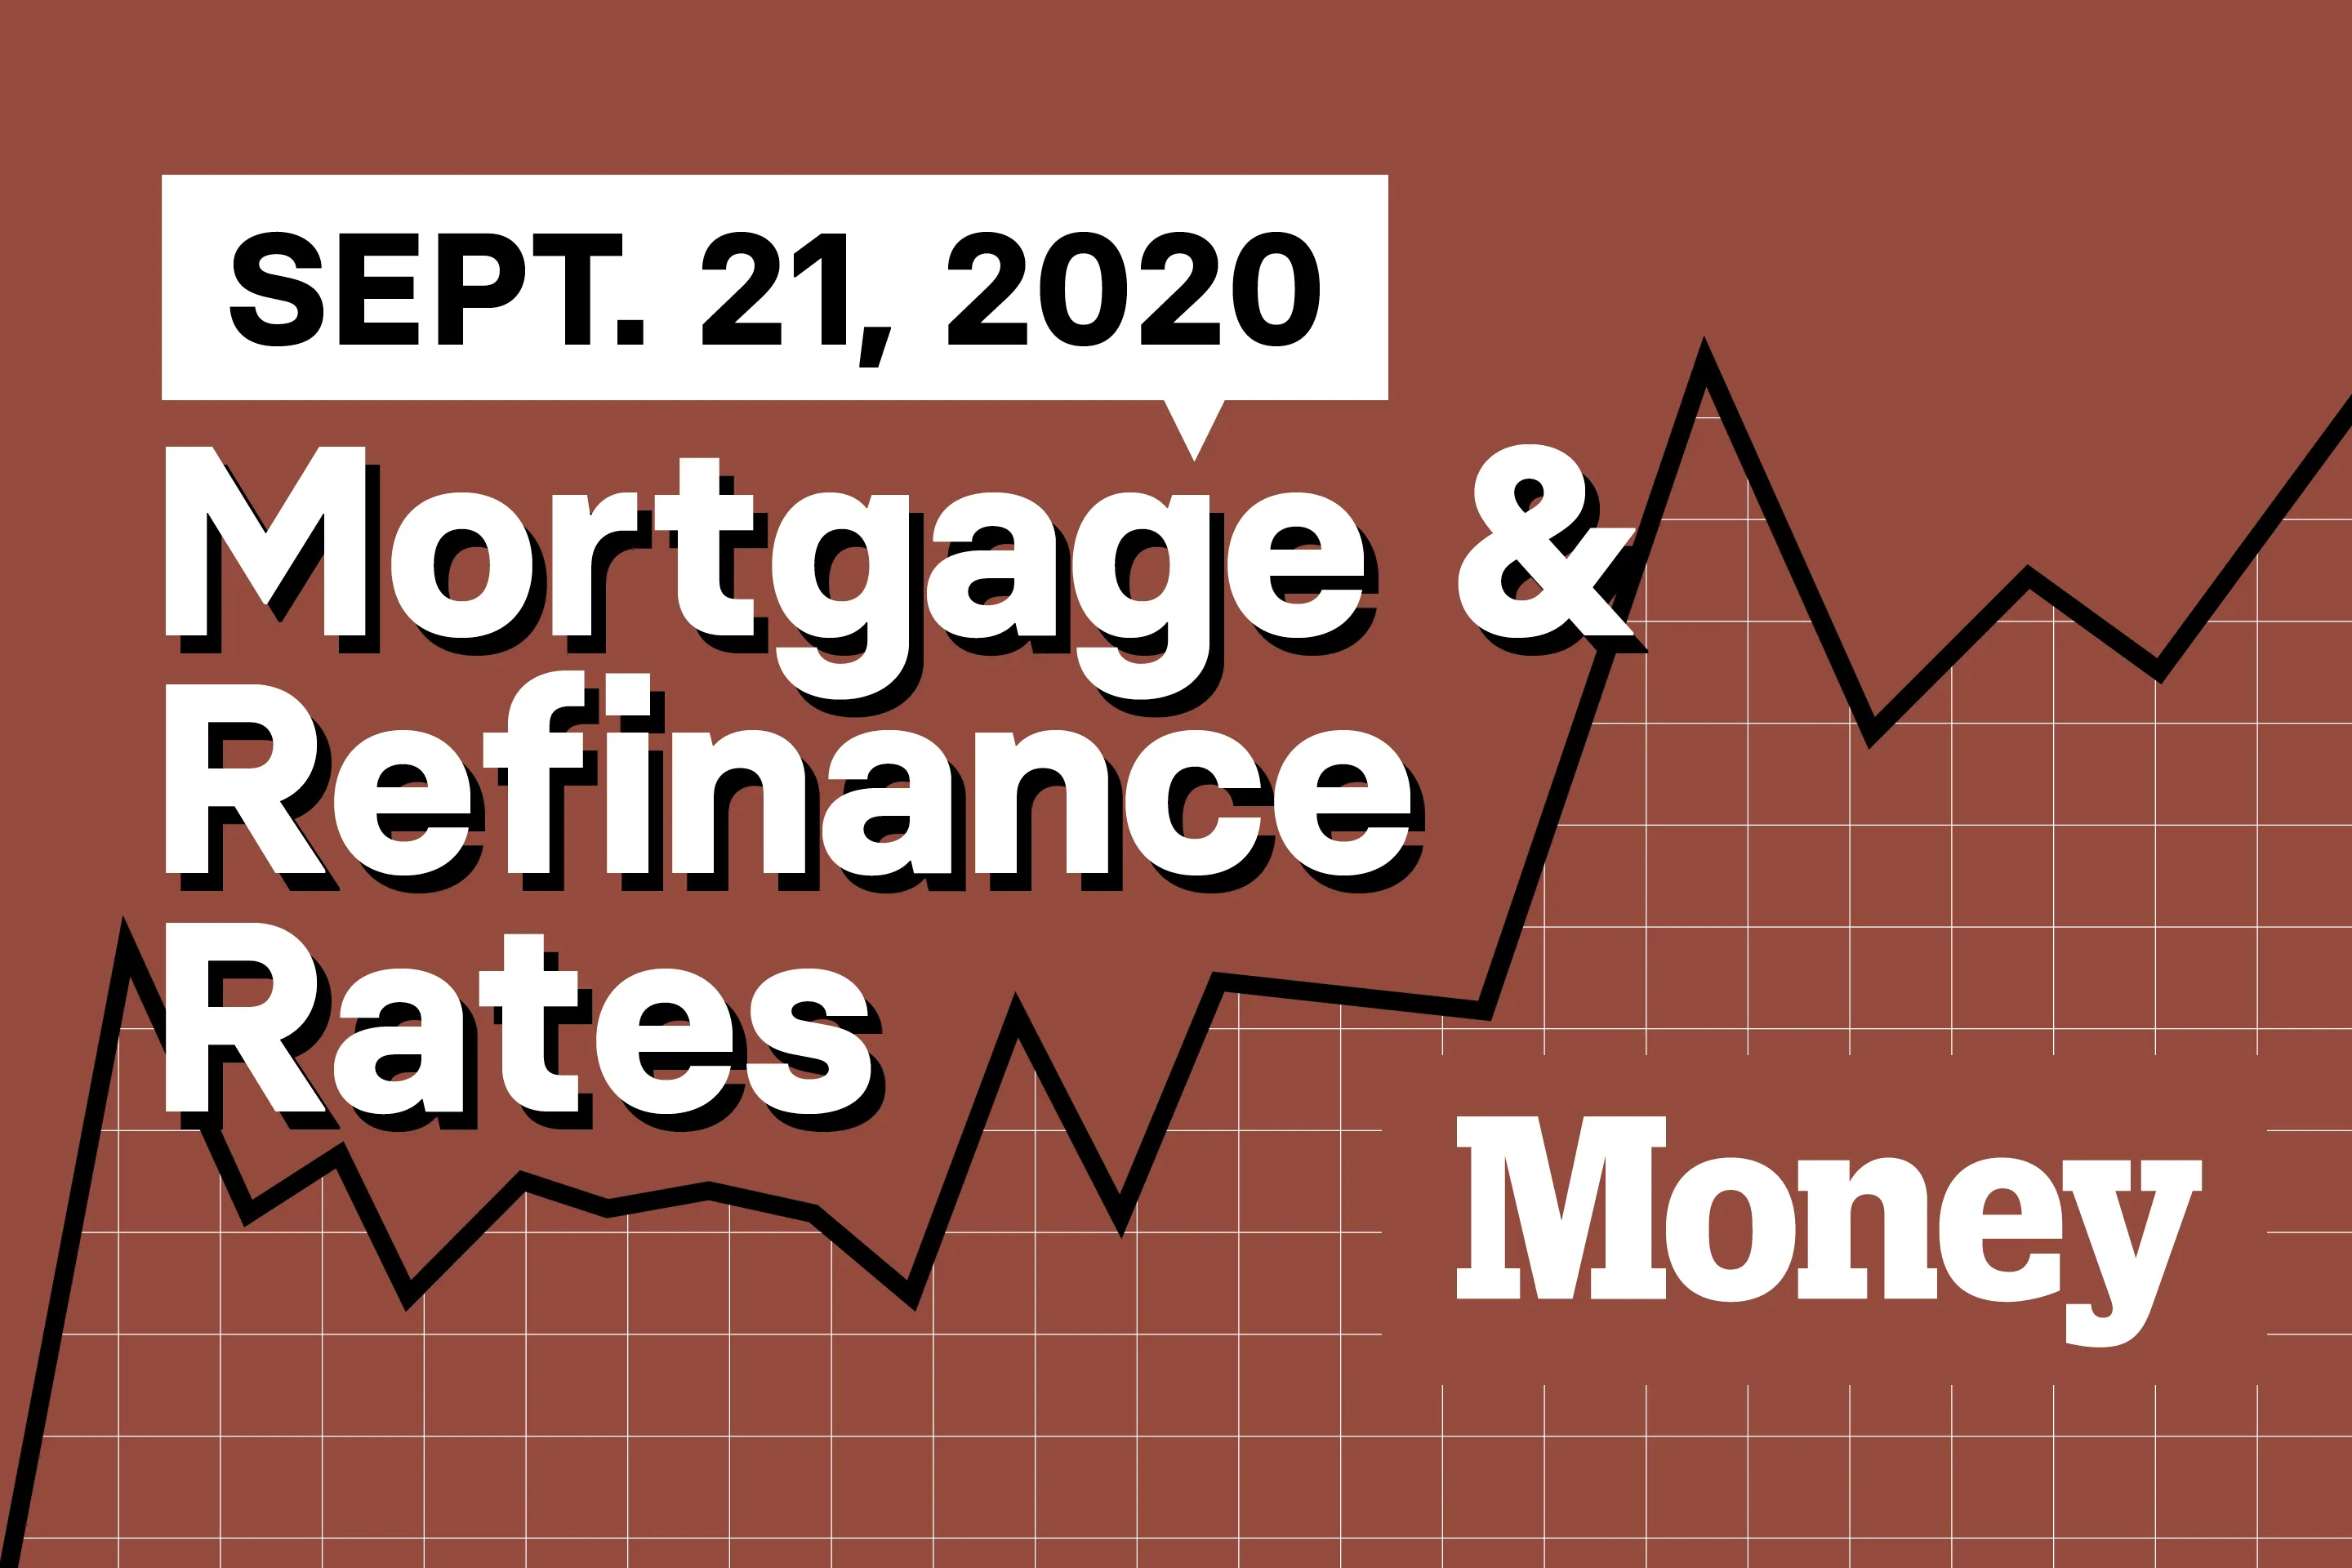 Here Are Today's Best Mortgage & Refinance Rates for September 21, 2020